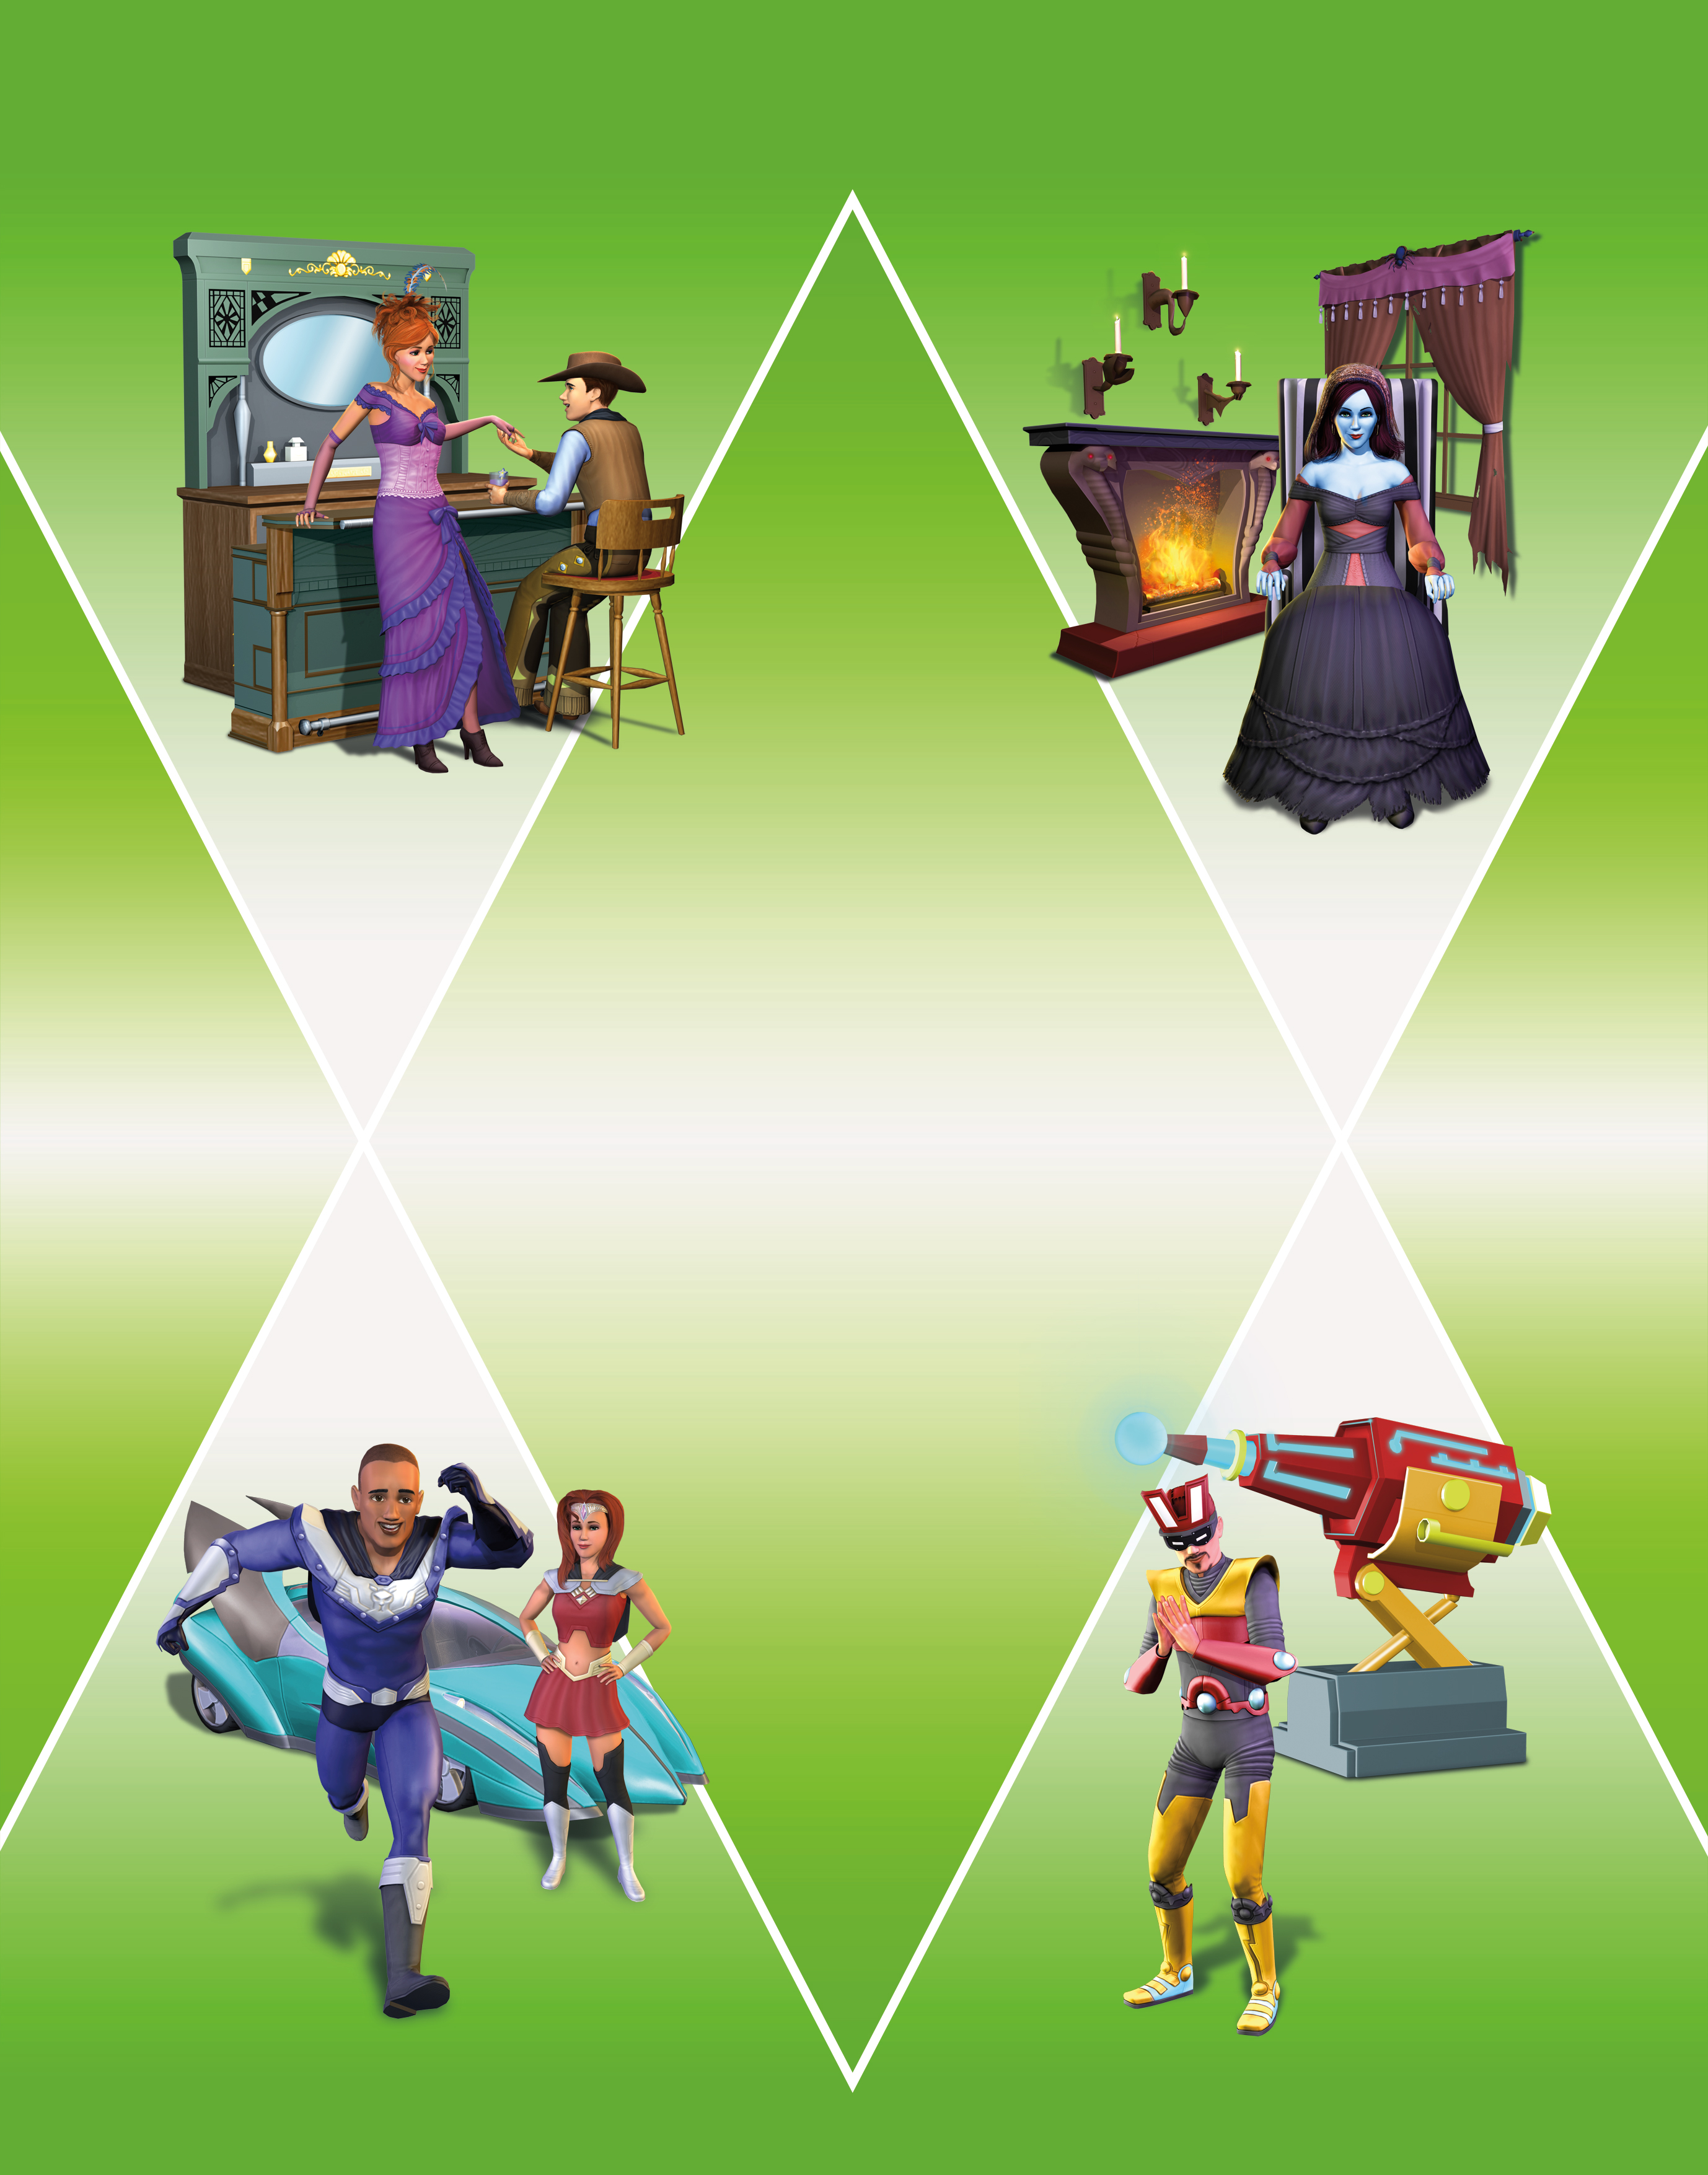 sims 3 all store content